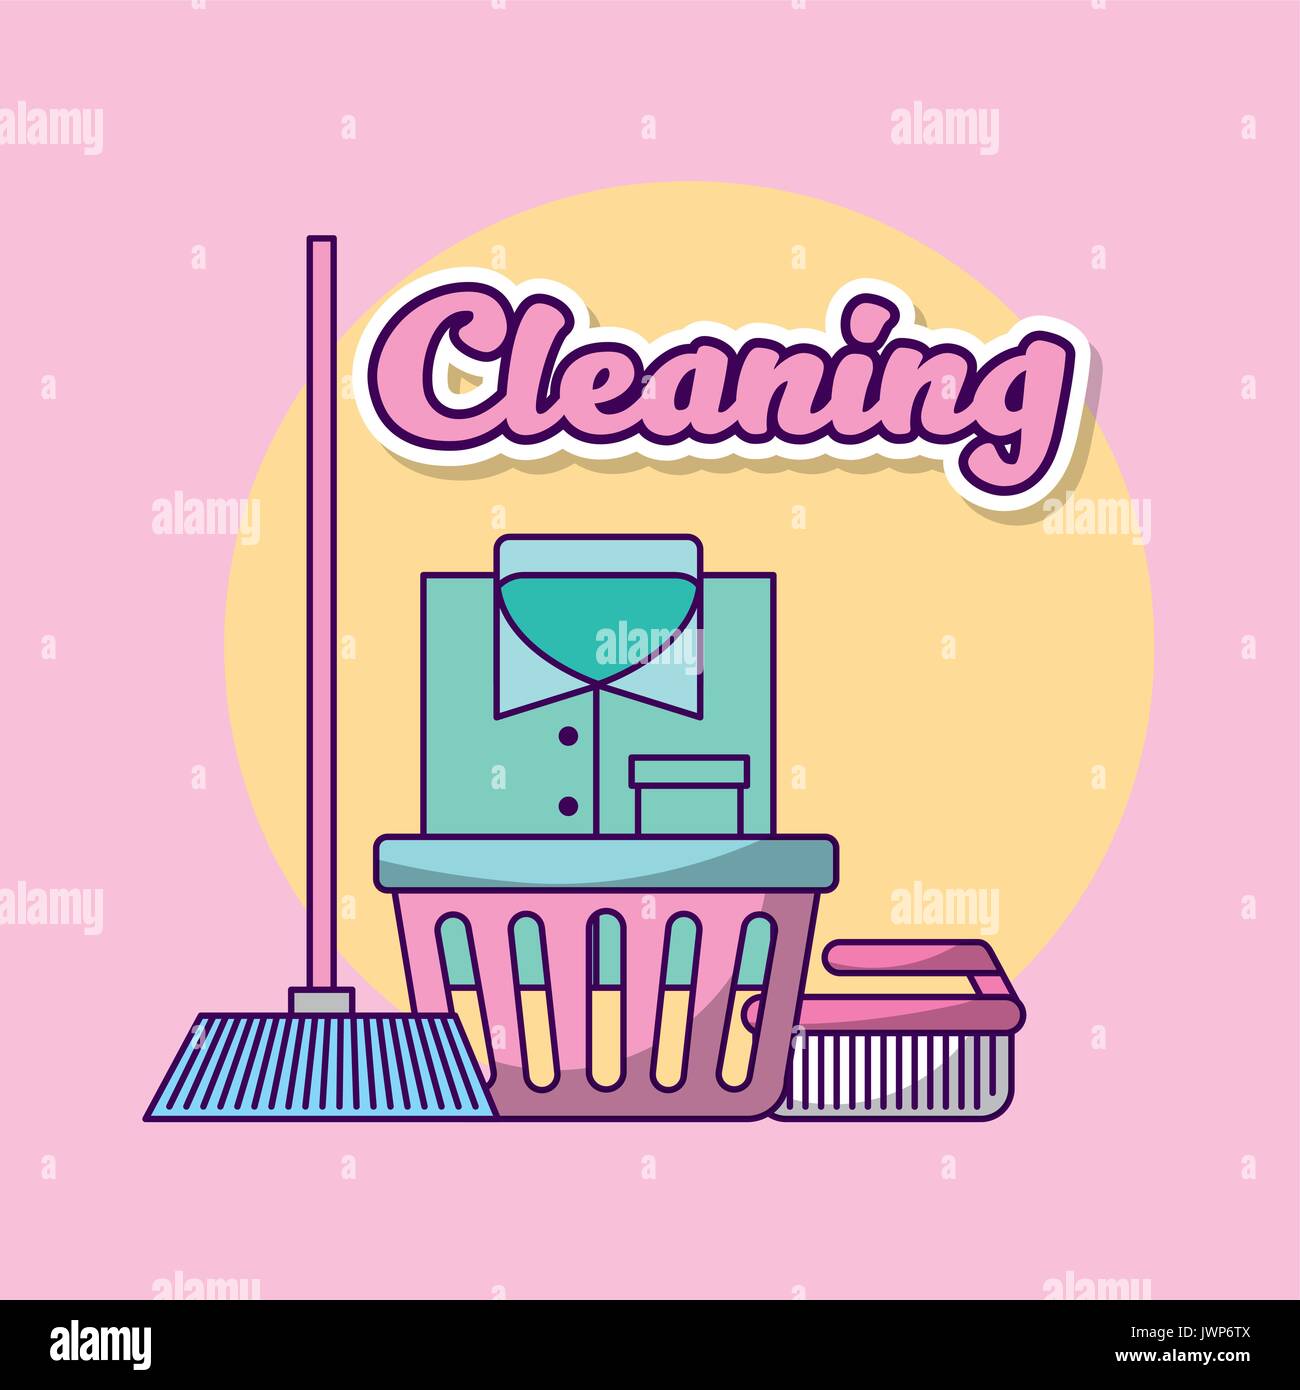 Laundry cleaning clothes Stock Vector